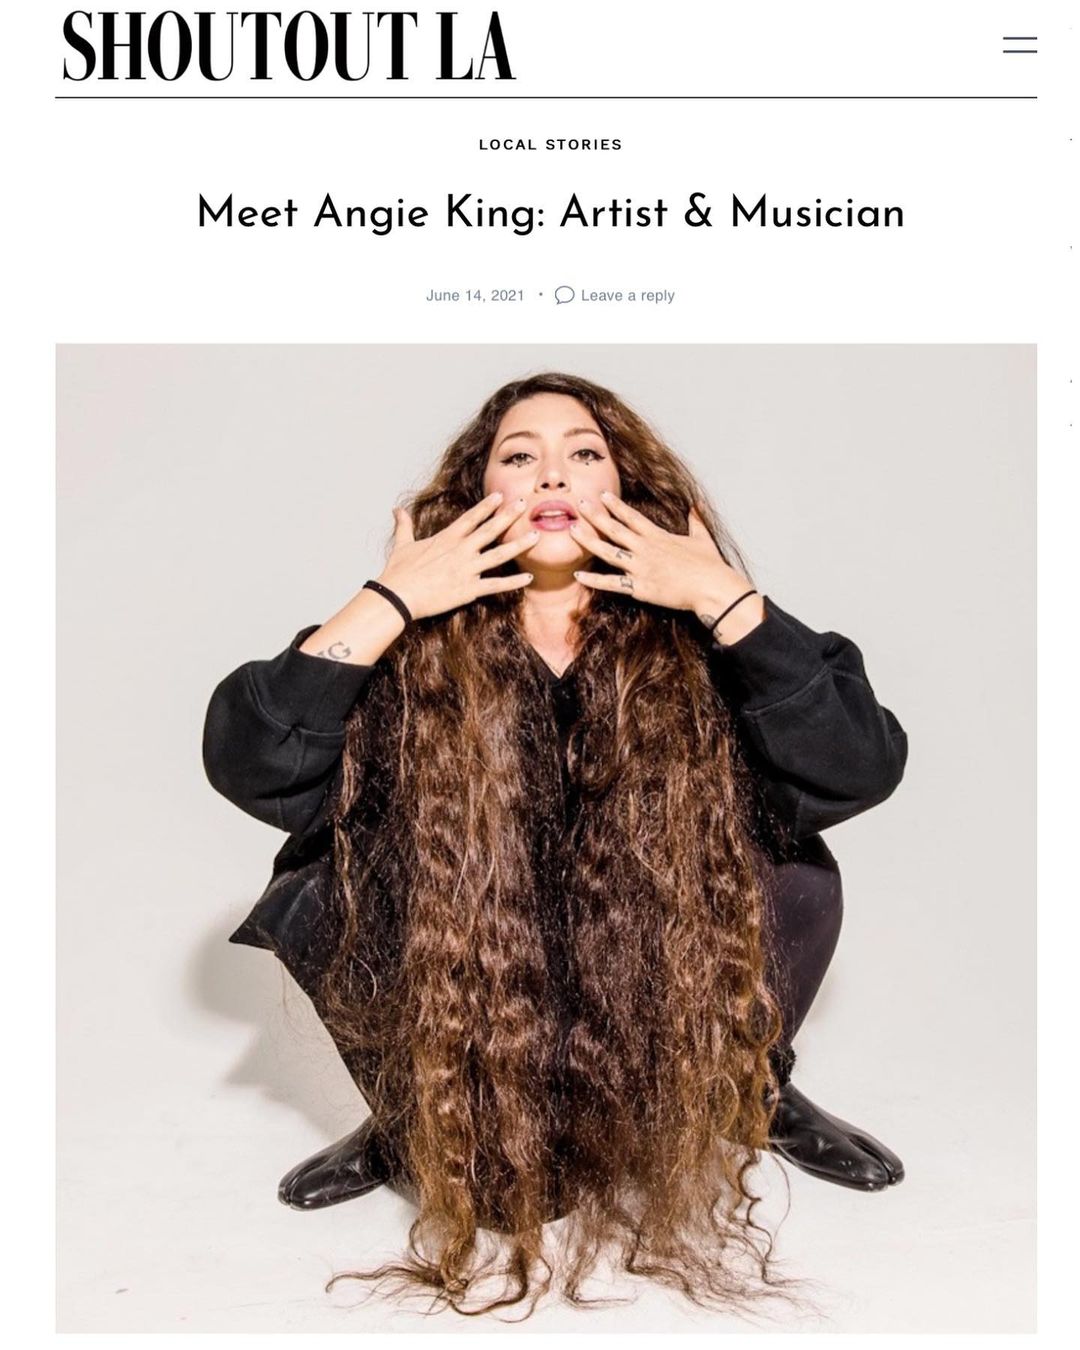 Shoutout LA features Angie King in a June 14, 2021 article